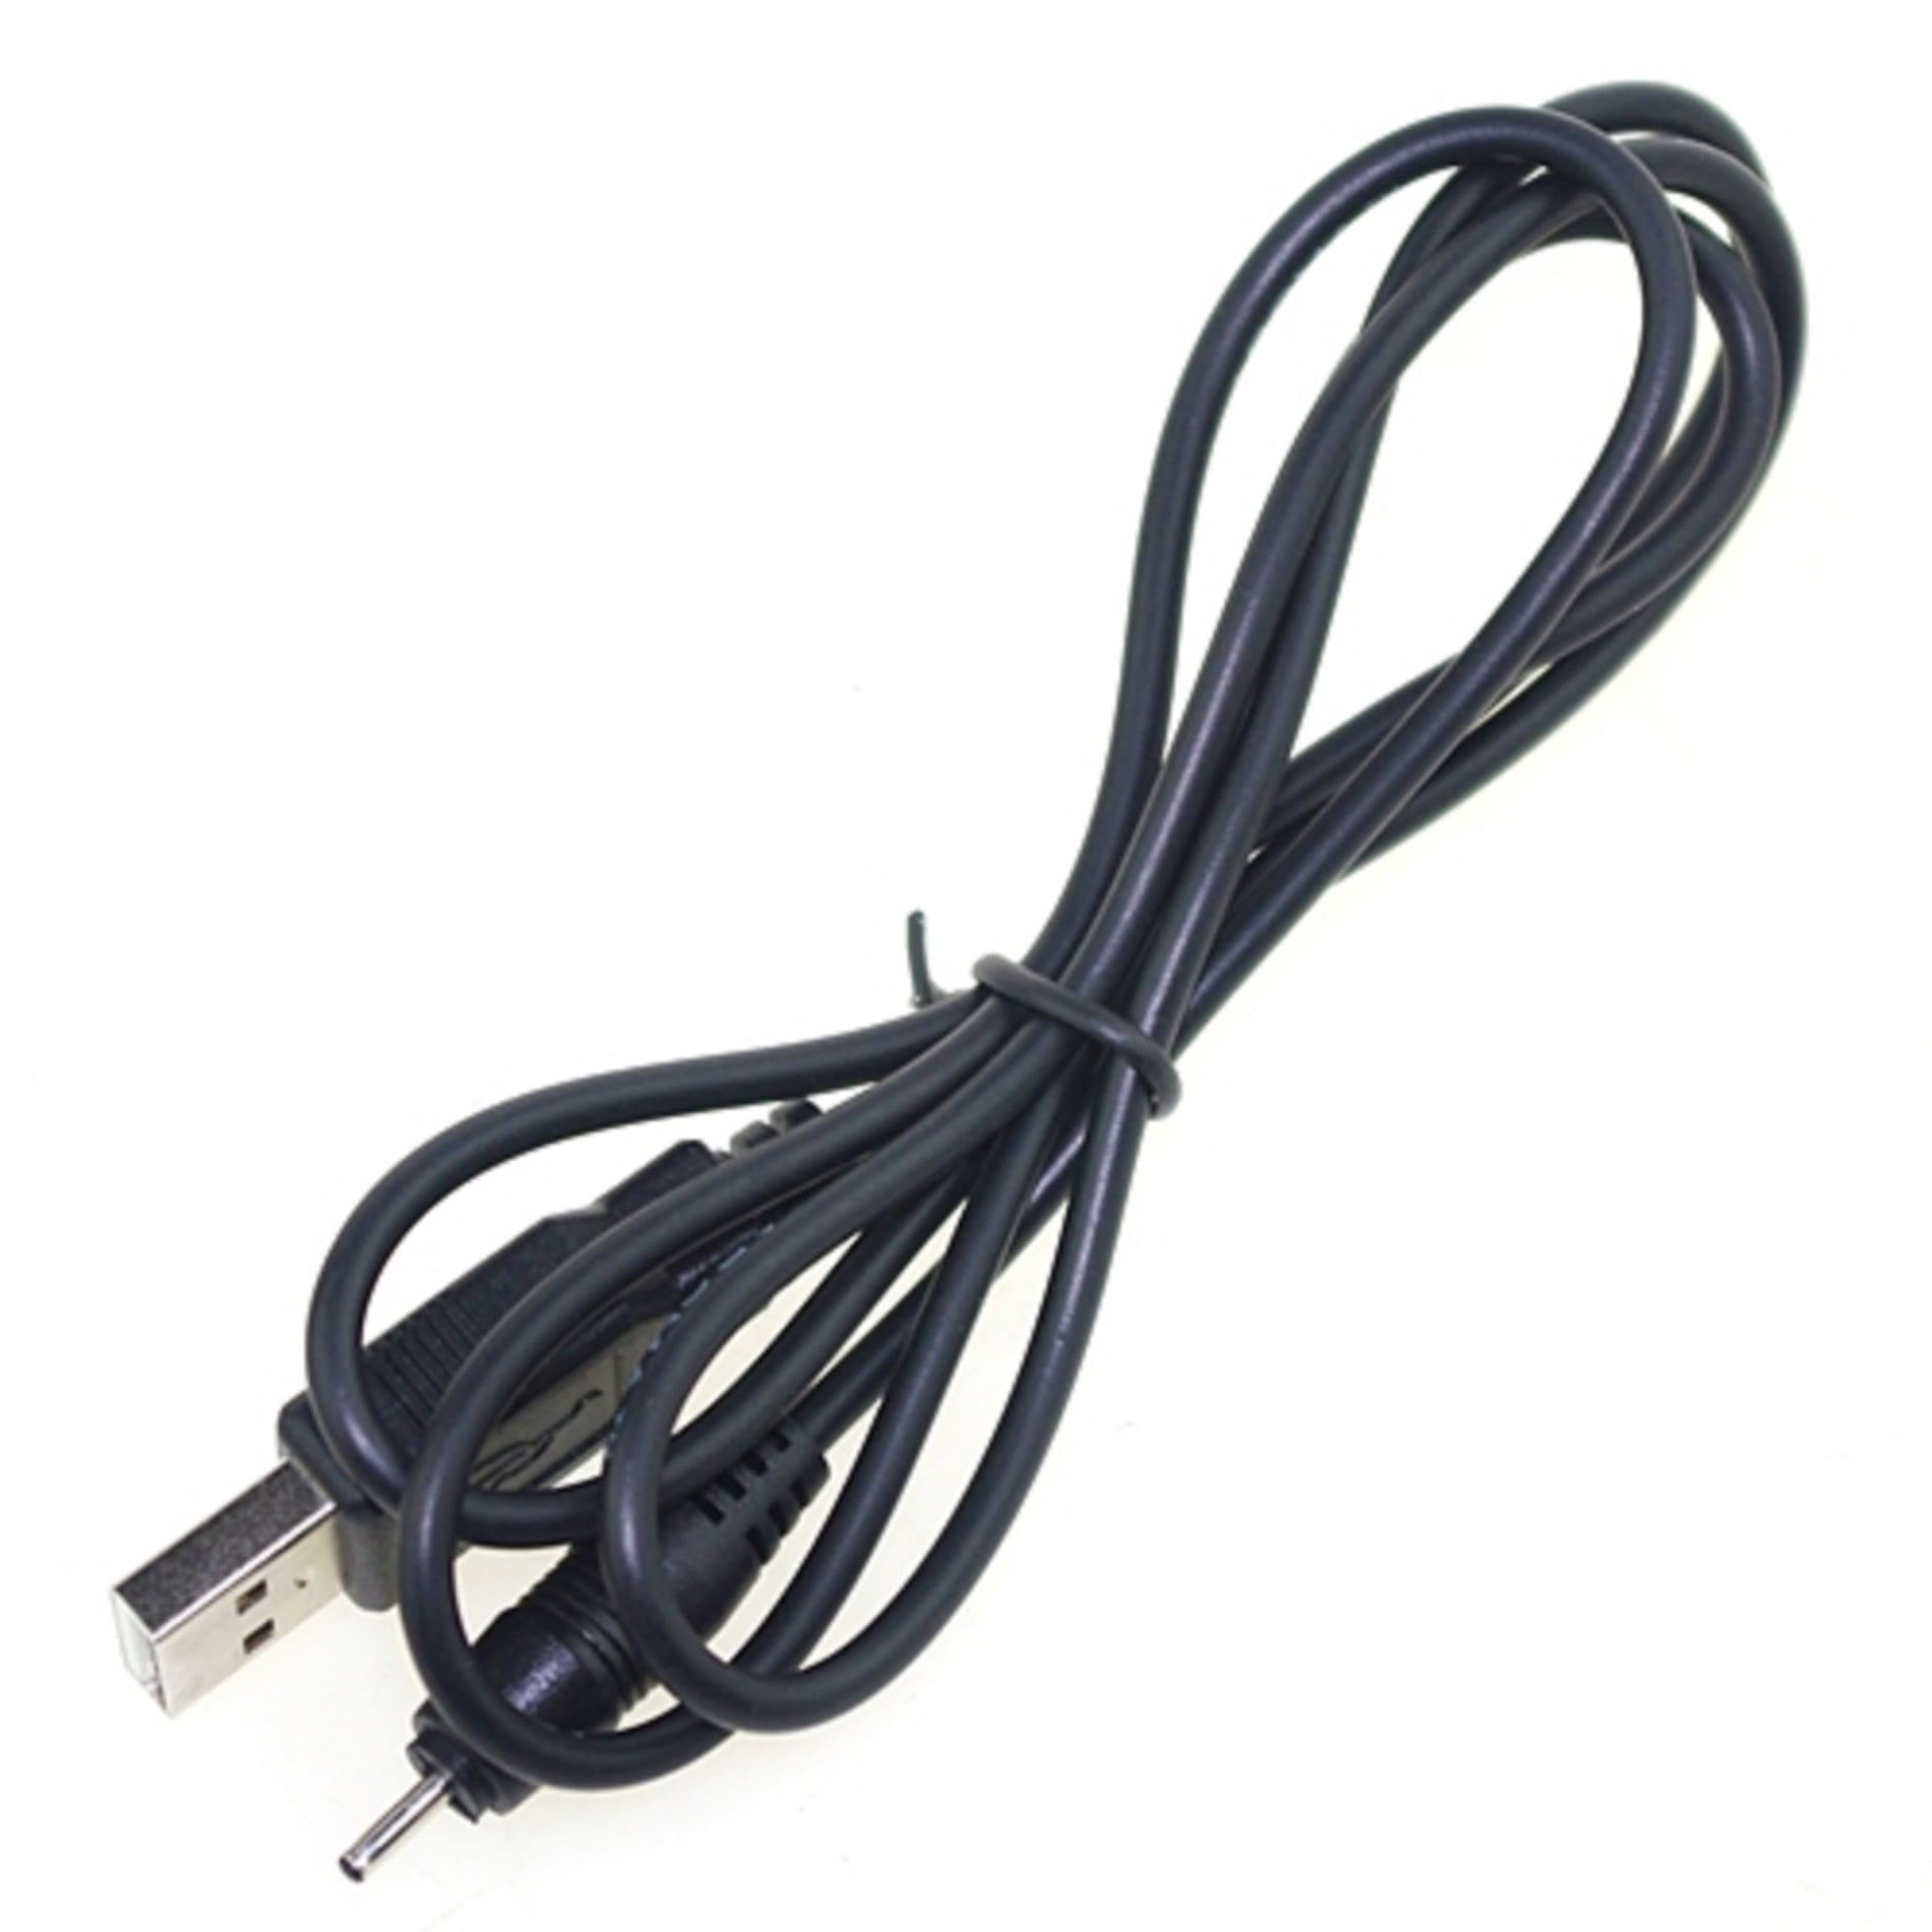 USB PC Charging Cable DC Charger Cord For Huion Rechargeable Tablet Stylus Pen 